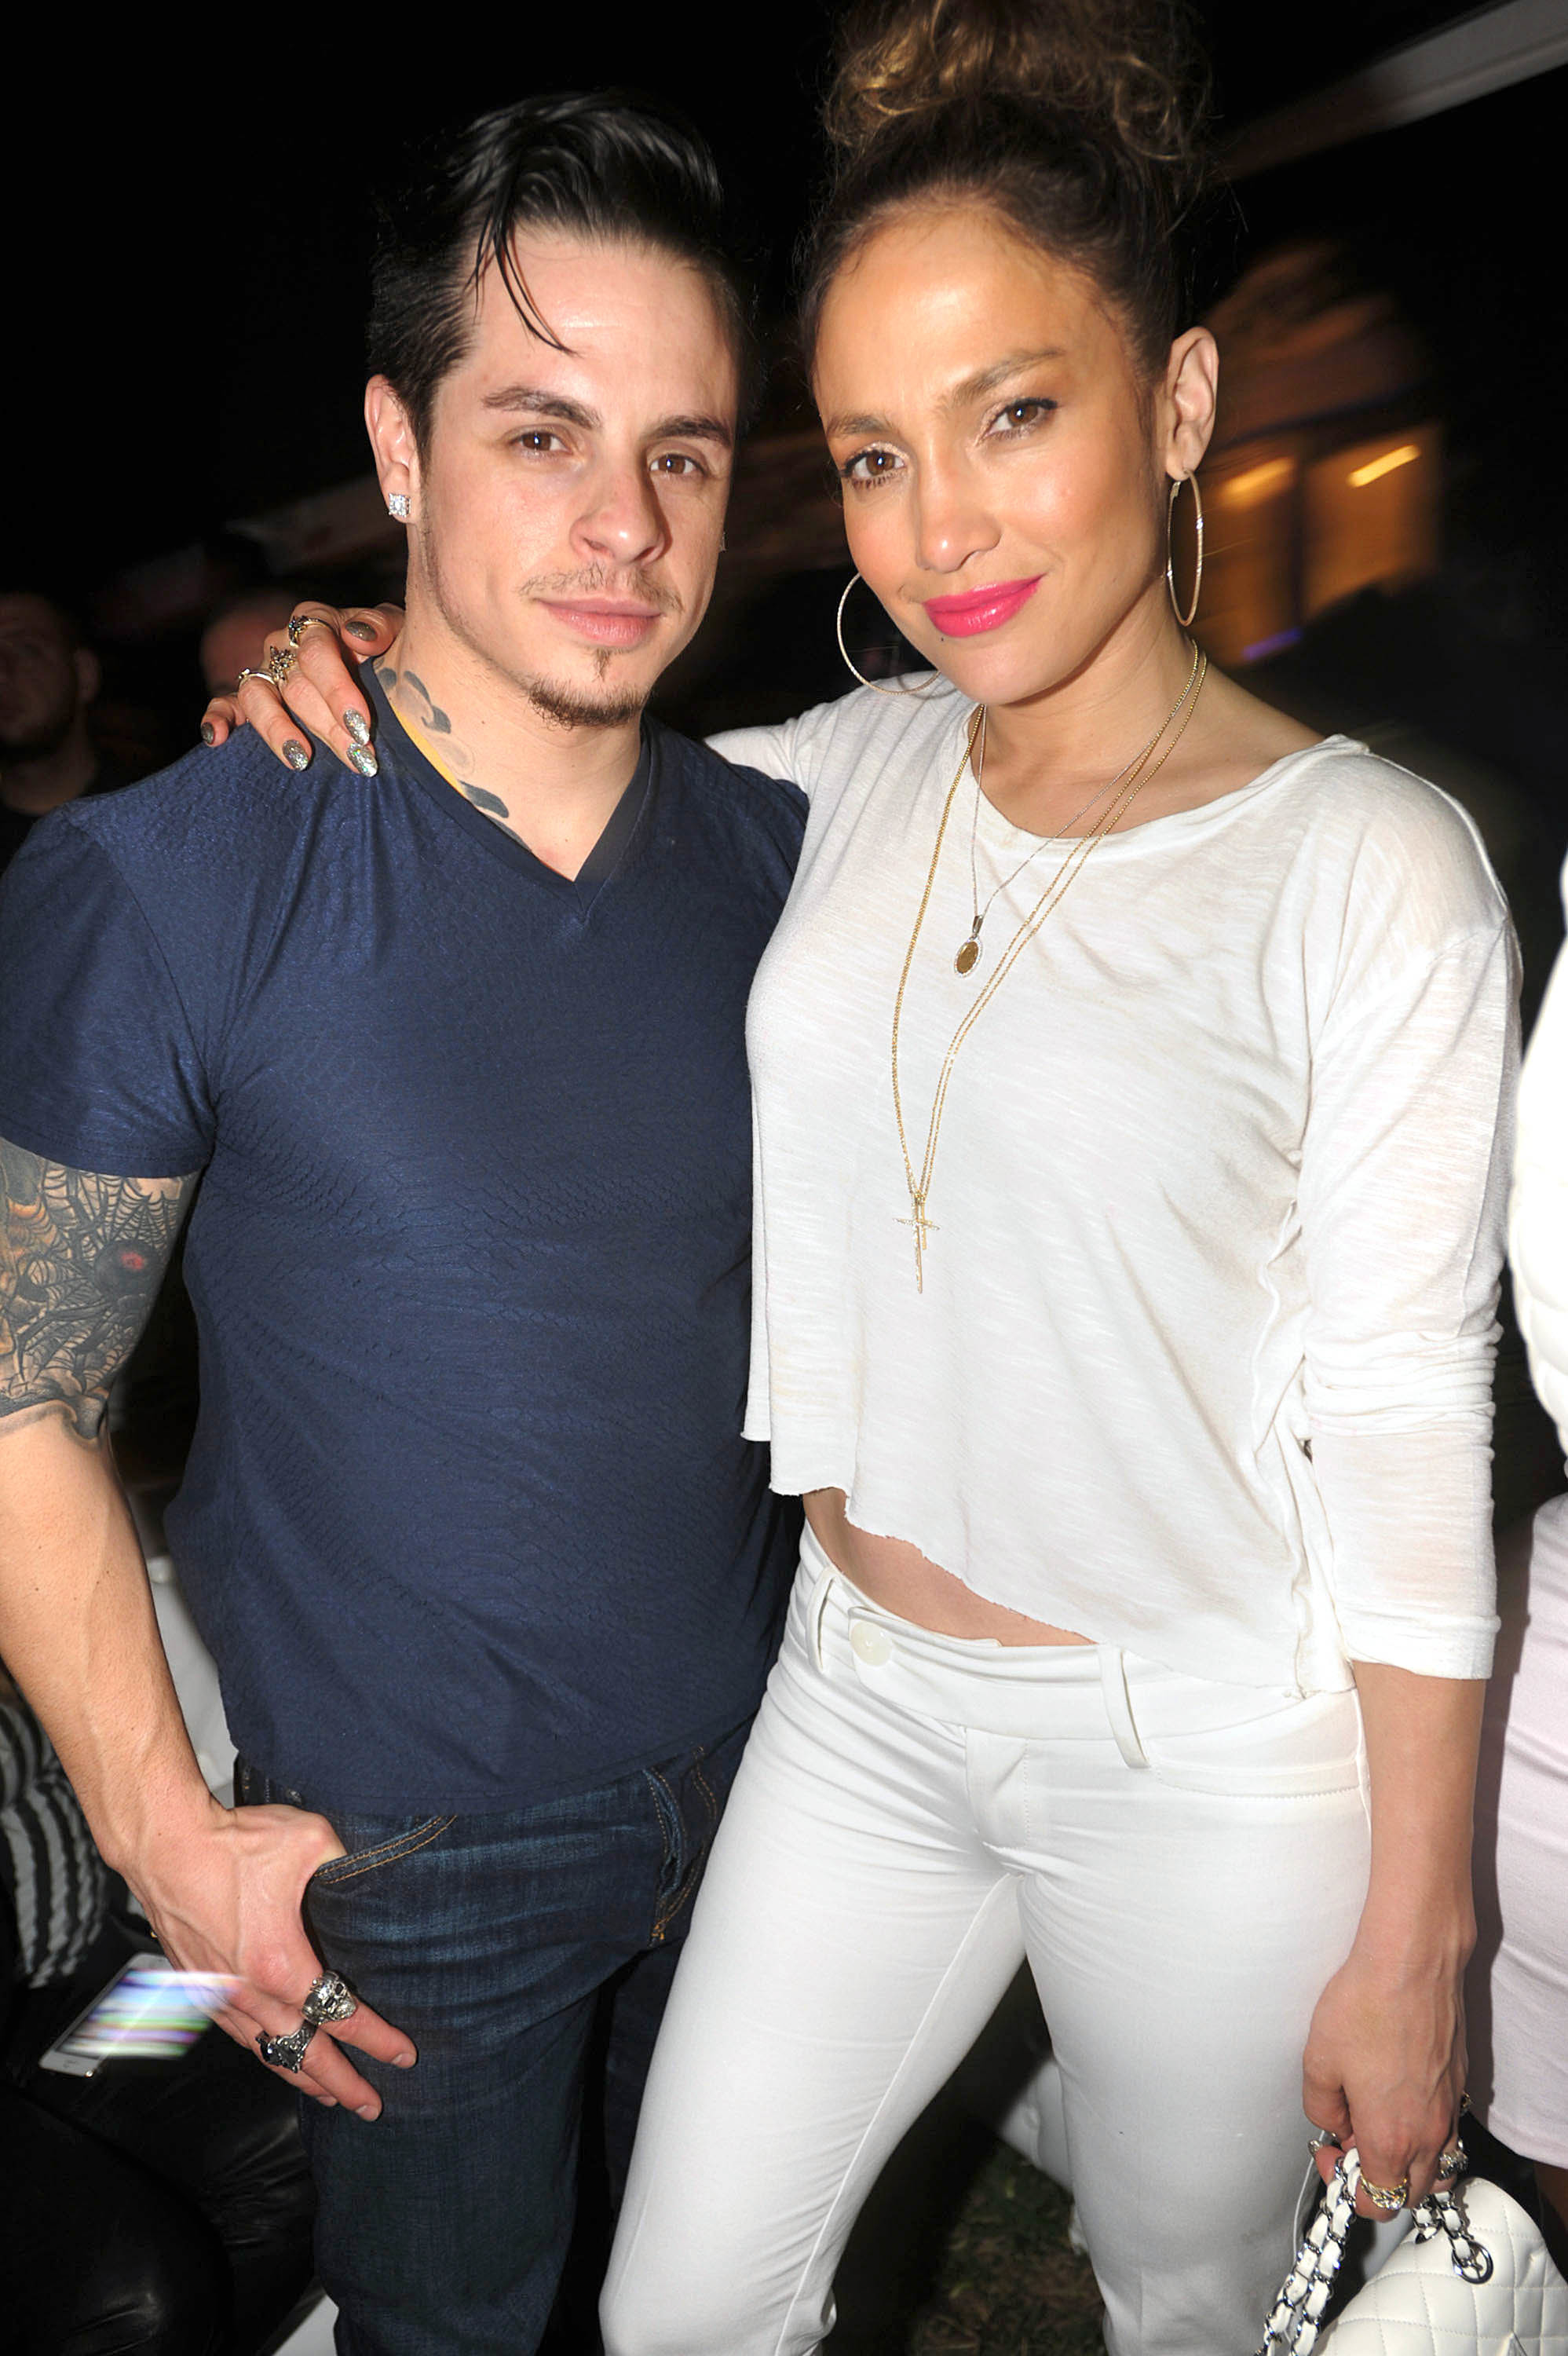 <p>Dancer-choreographer Casper Smart and <a href="https://www.wonderwall.com/celebrity/profiles/overview/jennifer-lopez-307.article">Jennifer Lopez</a> broke up in August 2016 after being off and on for the better part of five years. Casper is 18 years younger than the superstar.</p>